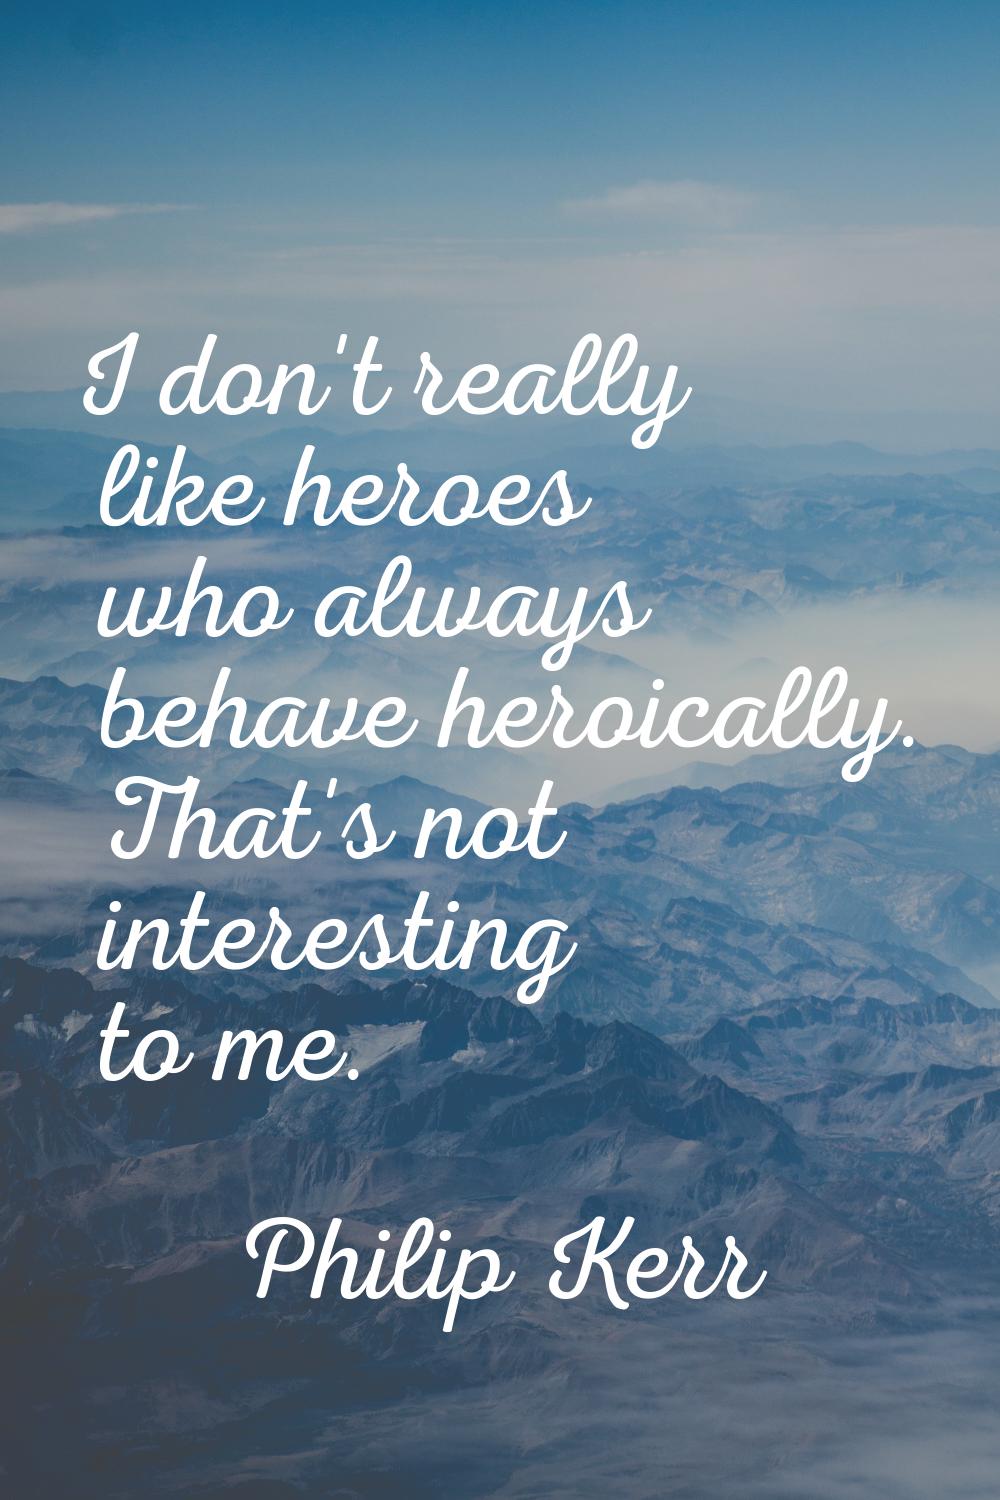 I don't really like heroes who always behave heroically. That's not interesting to me.